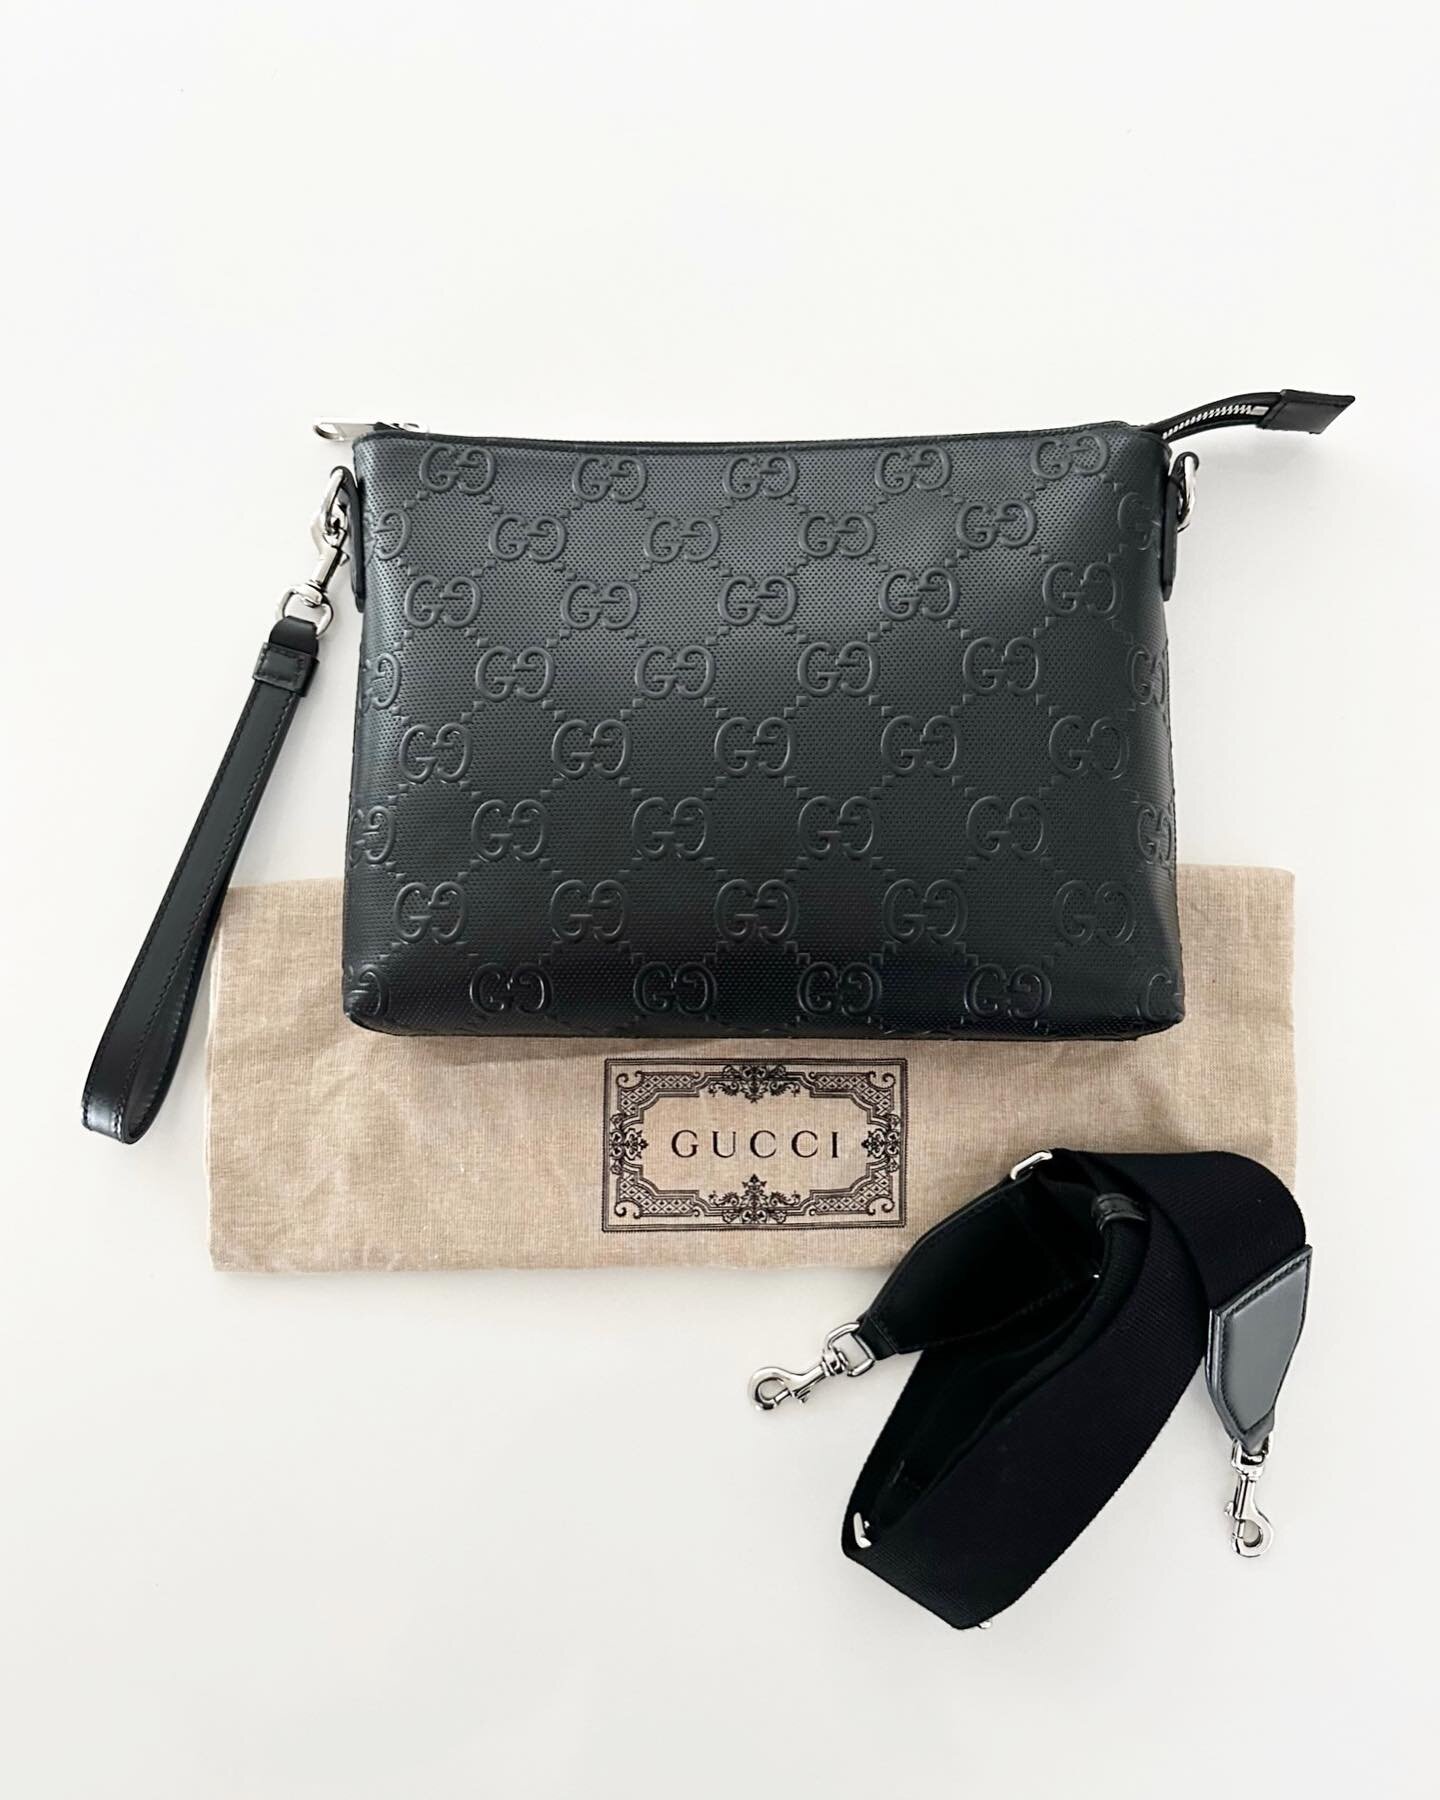 Brand new with dust bag Black Leather Medium Messenger Bag/Wristlet/clutch. This is a great option for a man or a woman and so versatile. It&rsquo;s a wristlet, it&rsquo;s a clutch and it&rsquo;s a crossbody bag. $1495 (retail+tax was approx over $20